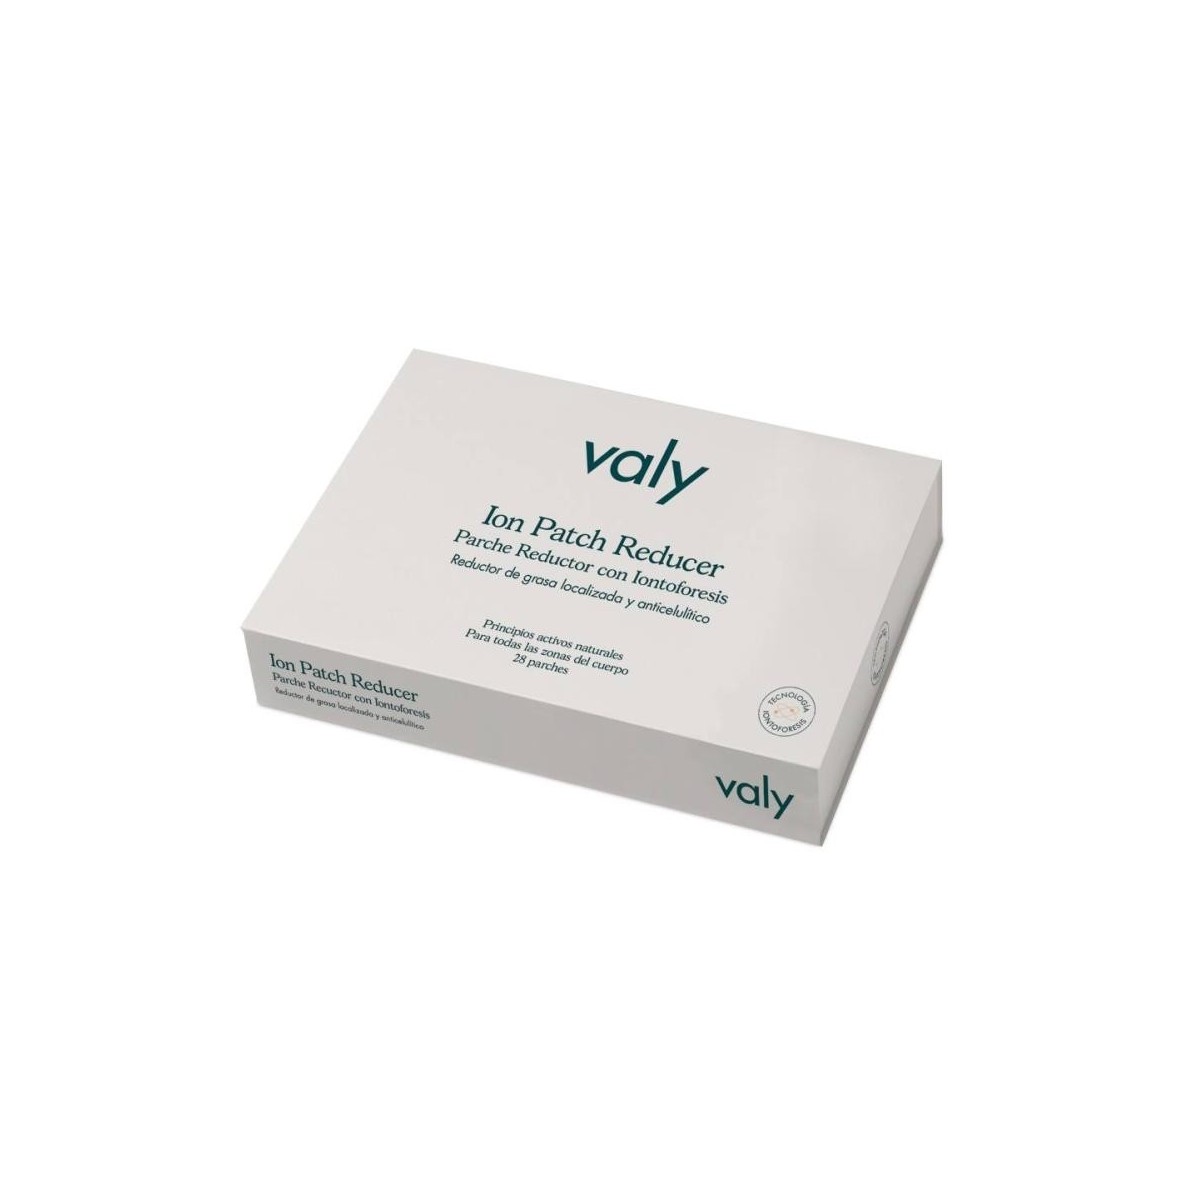 valy-ion-patch-reducer-28-parches